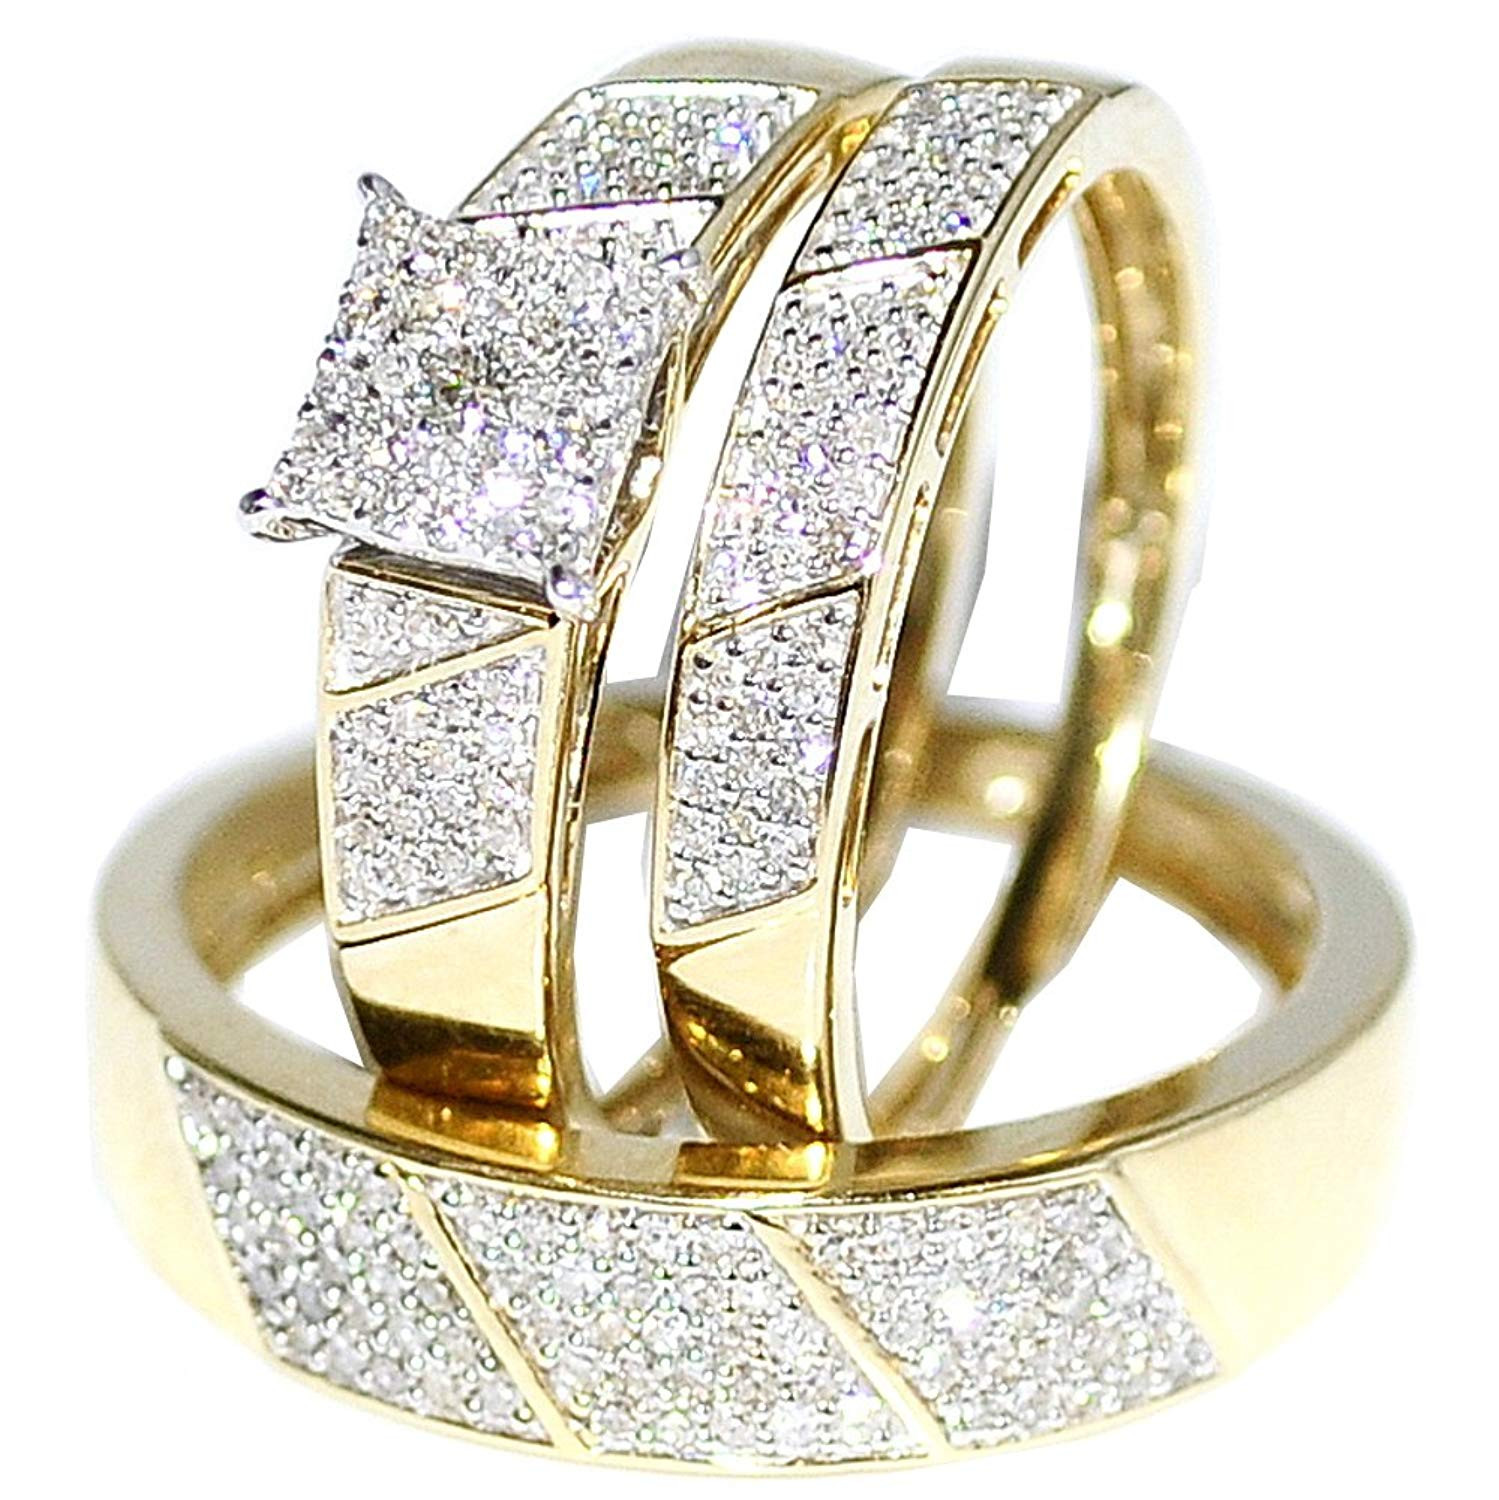 25 Ideas for Cheap Wedding Ring Sets His and Hers Home, Family, Style